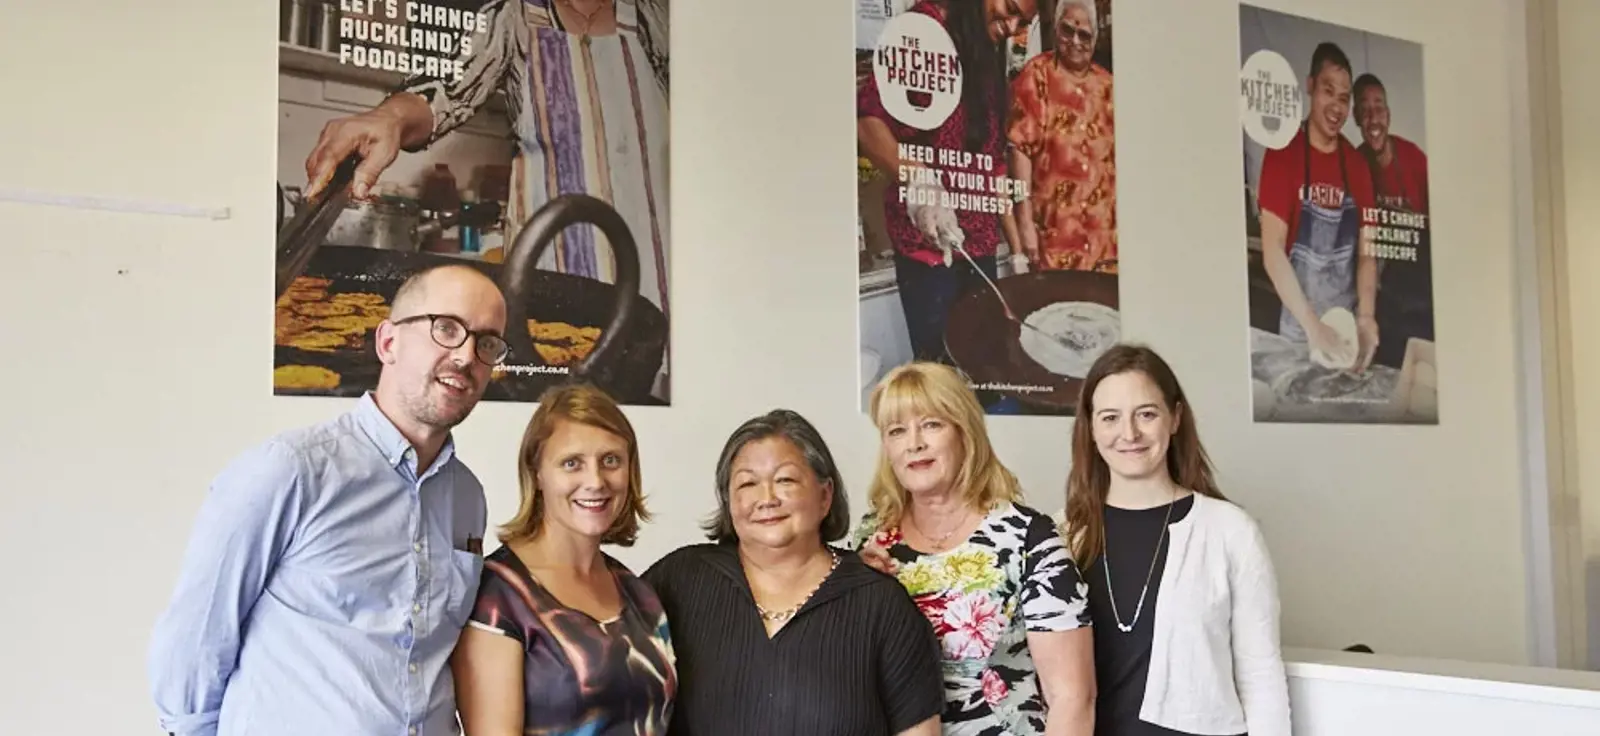 Auckland Foodscape Set To Change With Launch Of The Kitchen Project